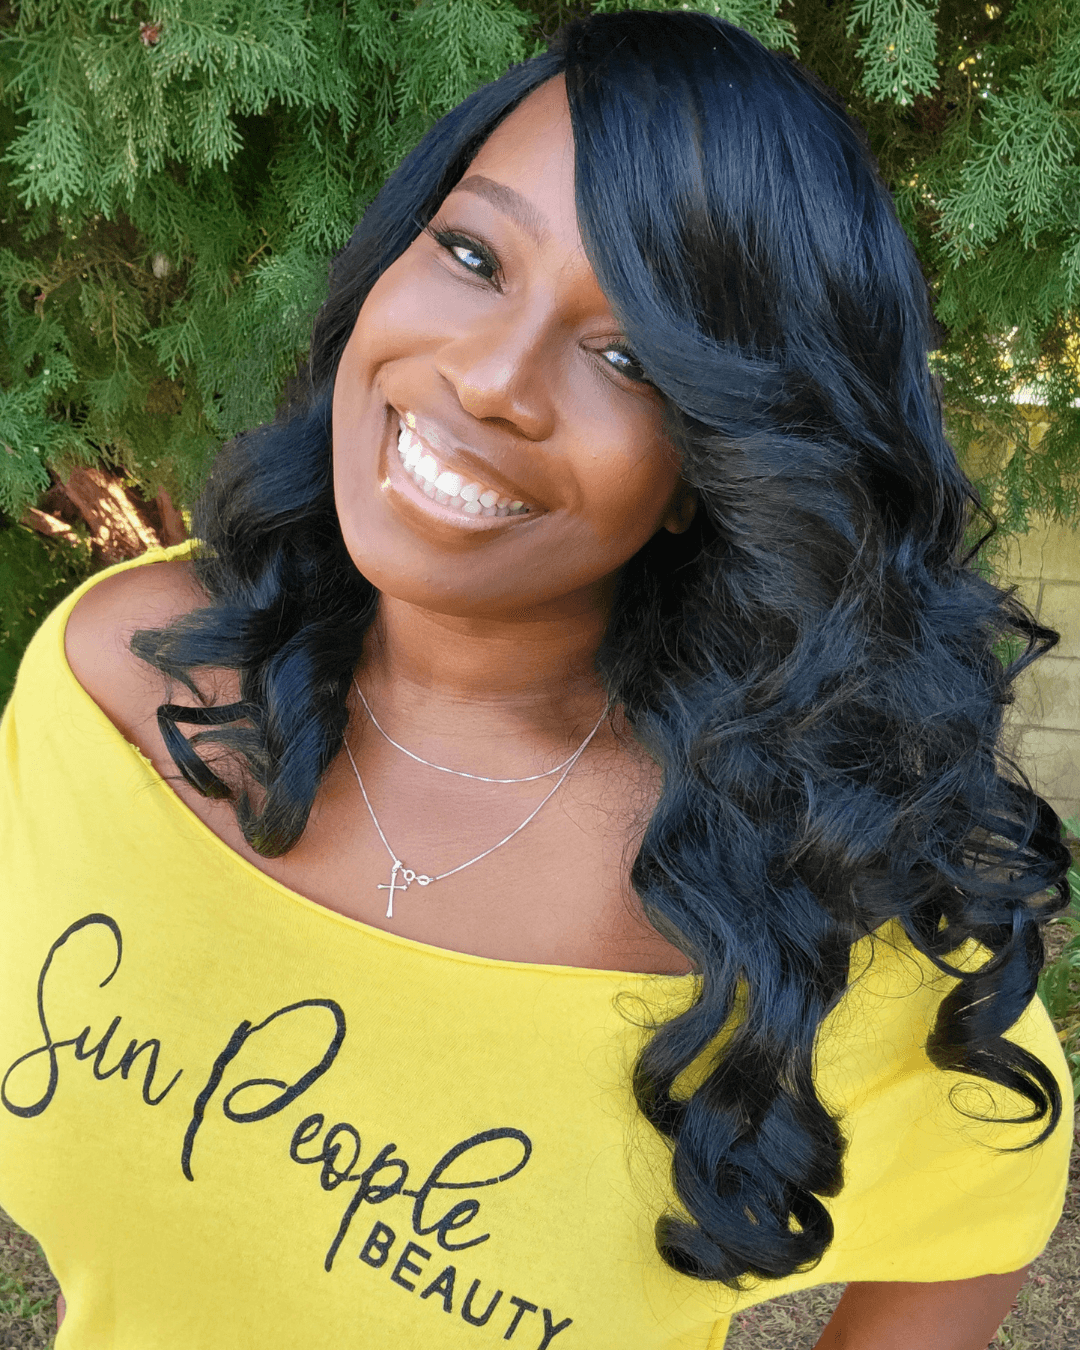 Sun People Beauty: Ex-Social Worker Creates Skincare Brand for Sun-Kissed Skin - BlackOwned365